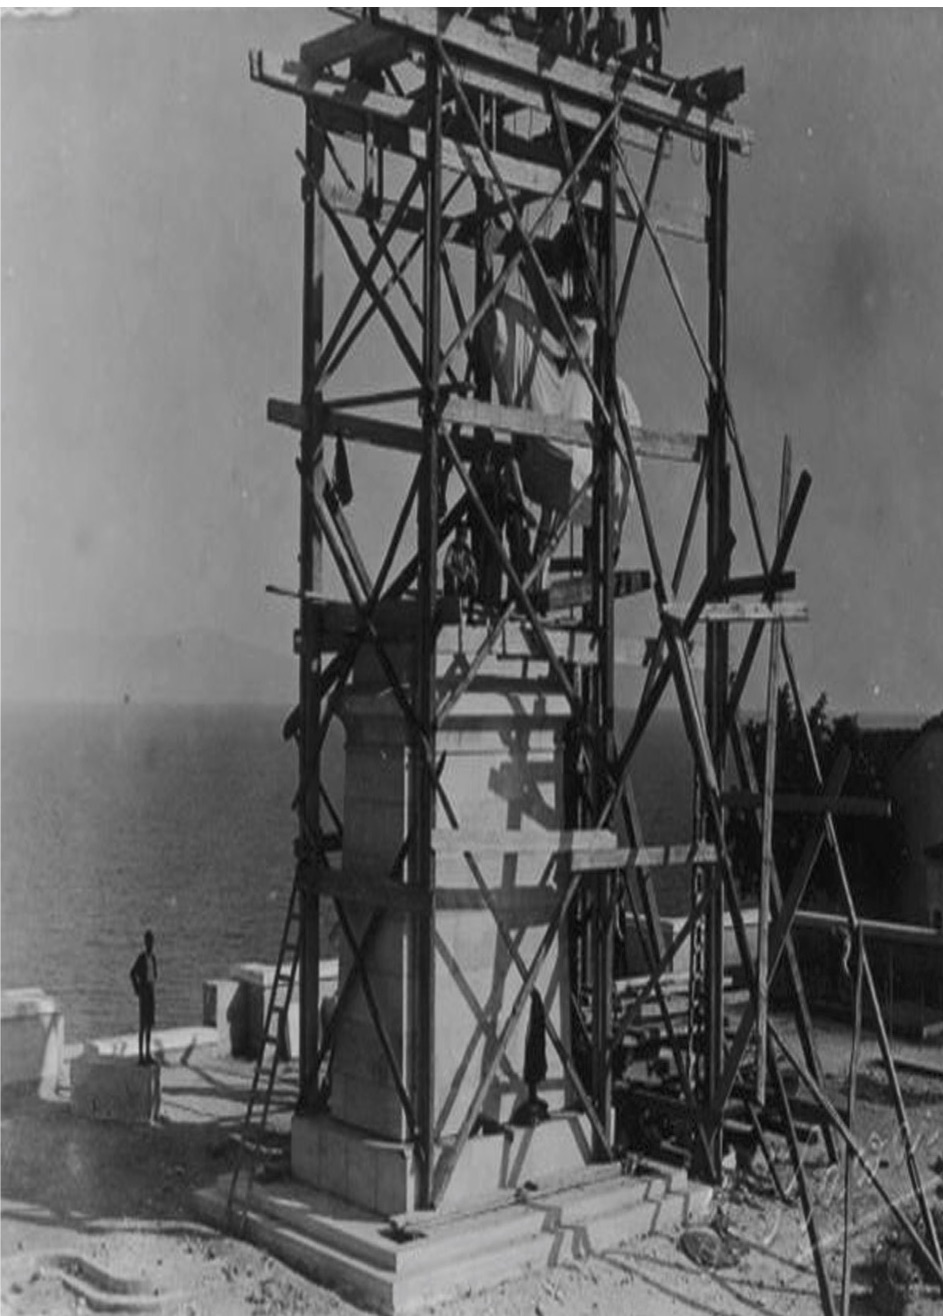 The placement of the statue of Mohammed Ali, wrapped in burlap behind the scaffolding. Kavala, 1934. I. Kapaios’ Archive